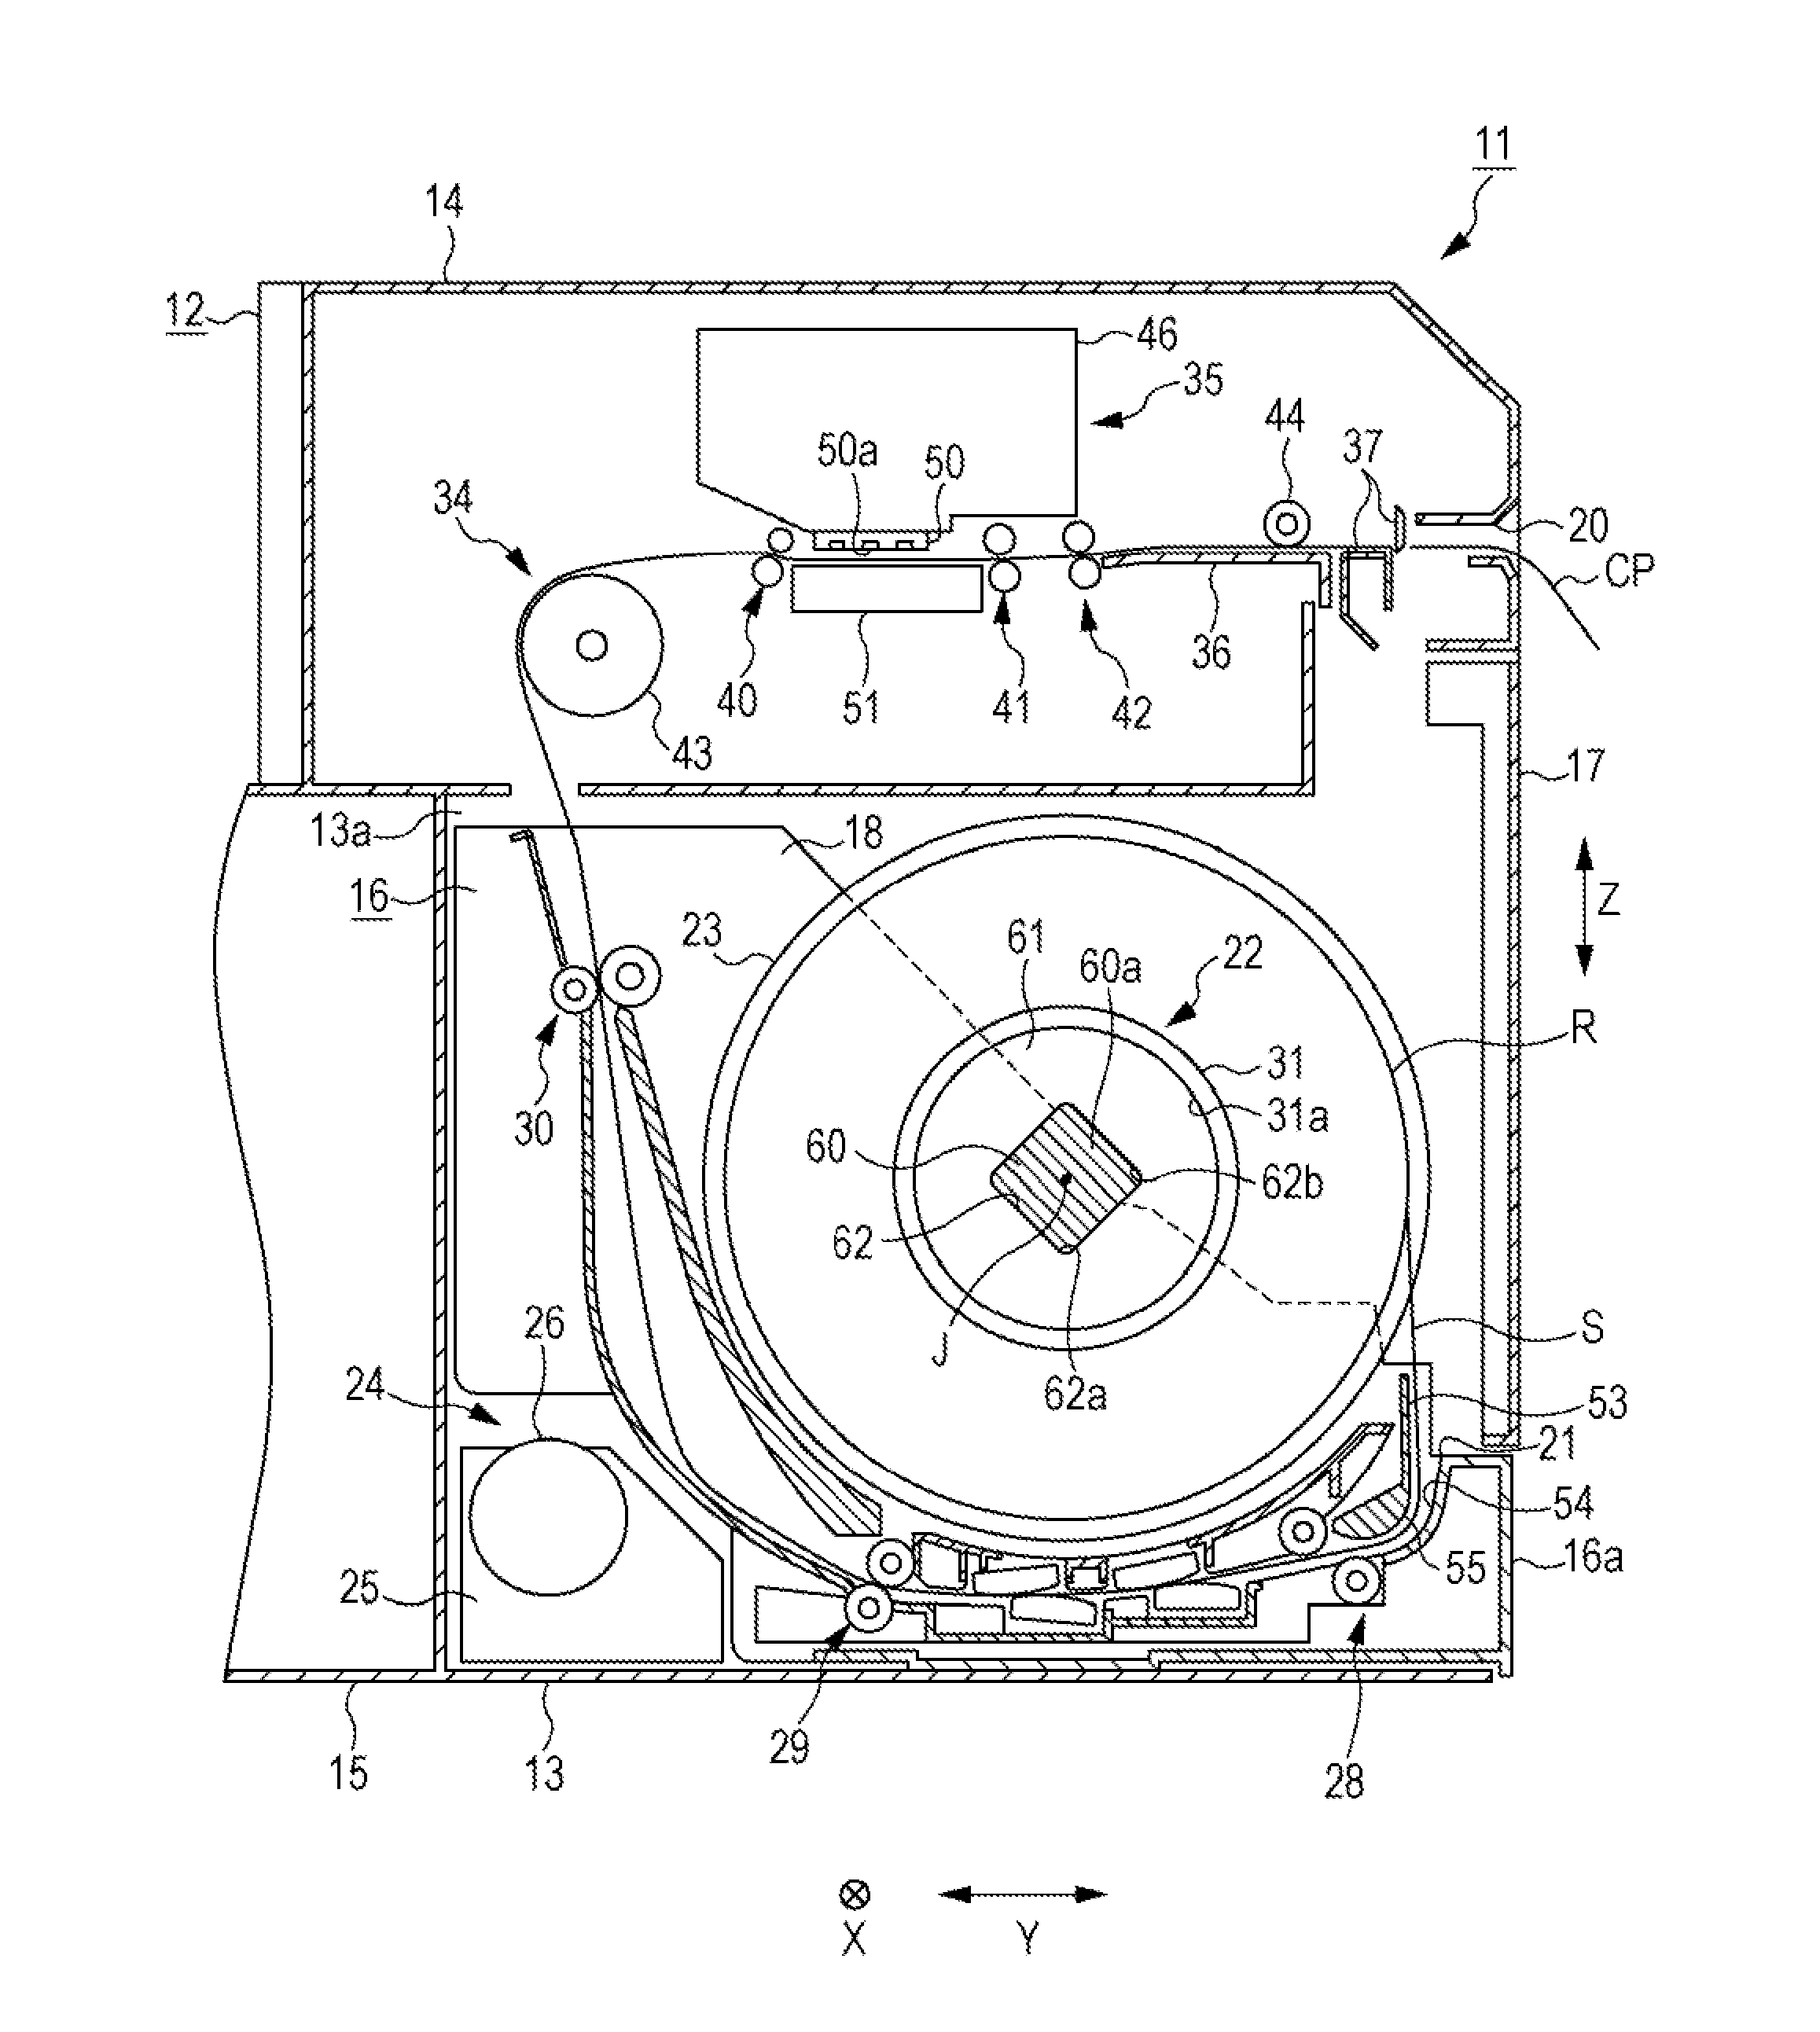 Roll medium supporting device and recording apparatus